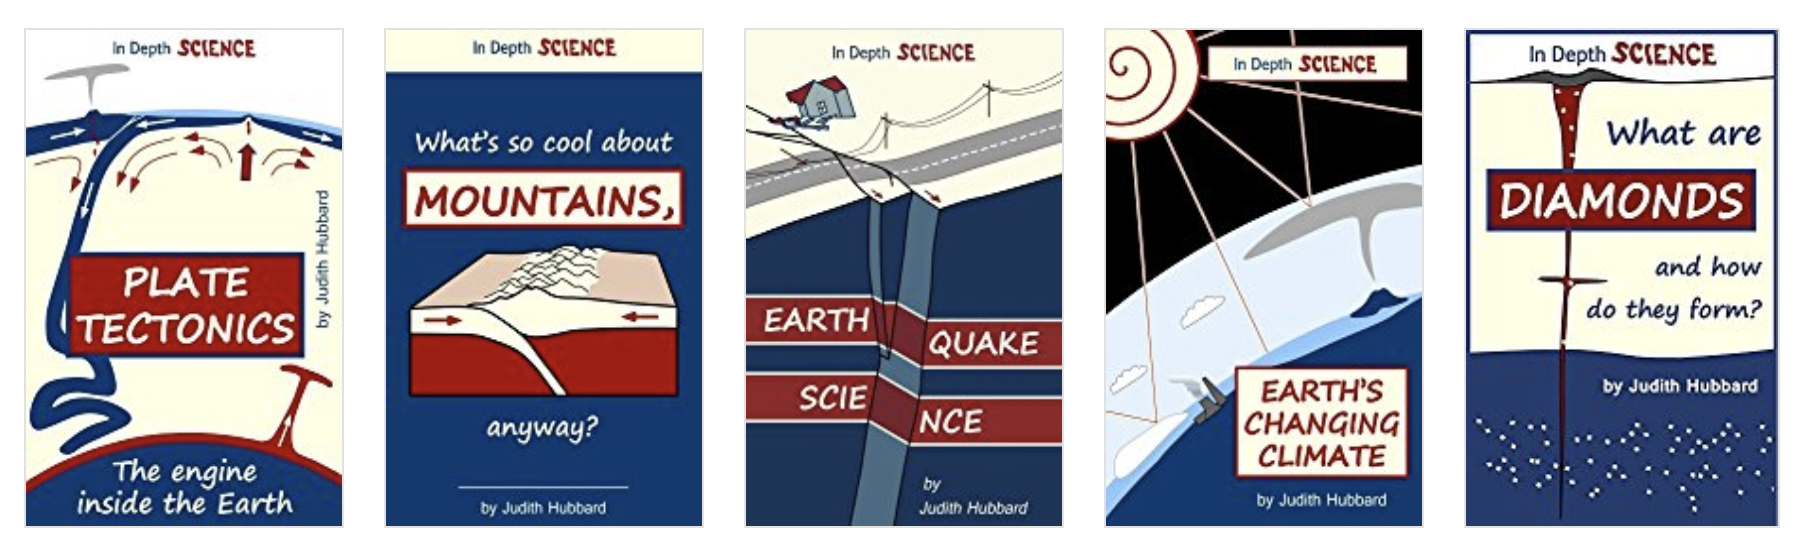 Asst. Prof Hubbard is a self-published author of five children’s books on topics like mountains and earthquakes (Source: Judith Hubbard)